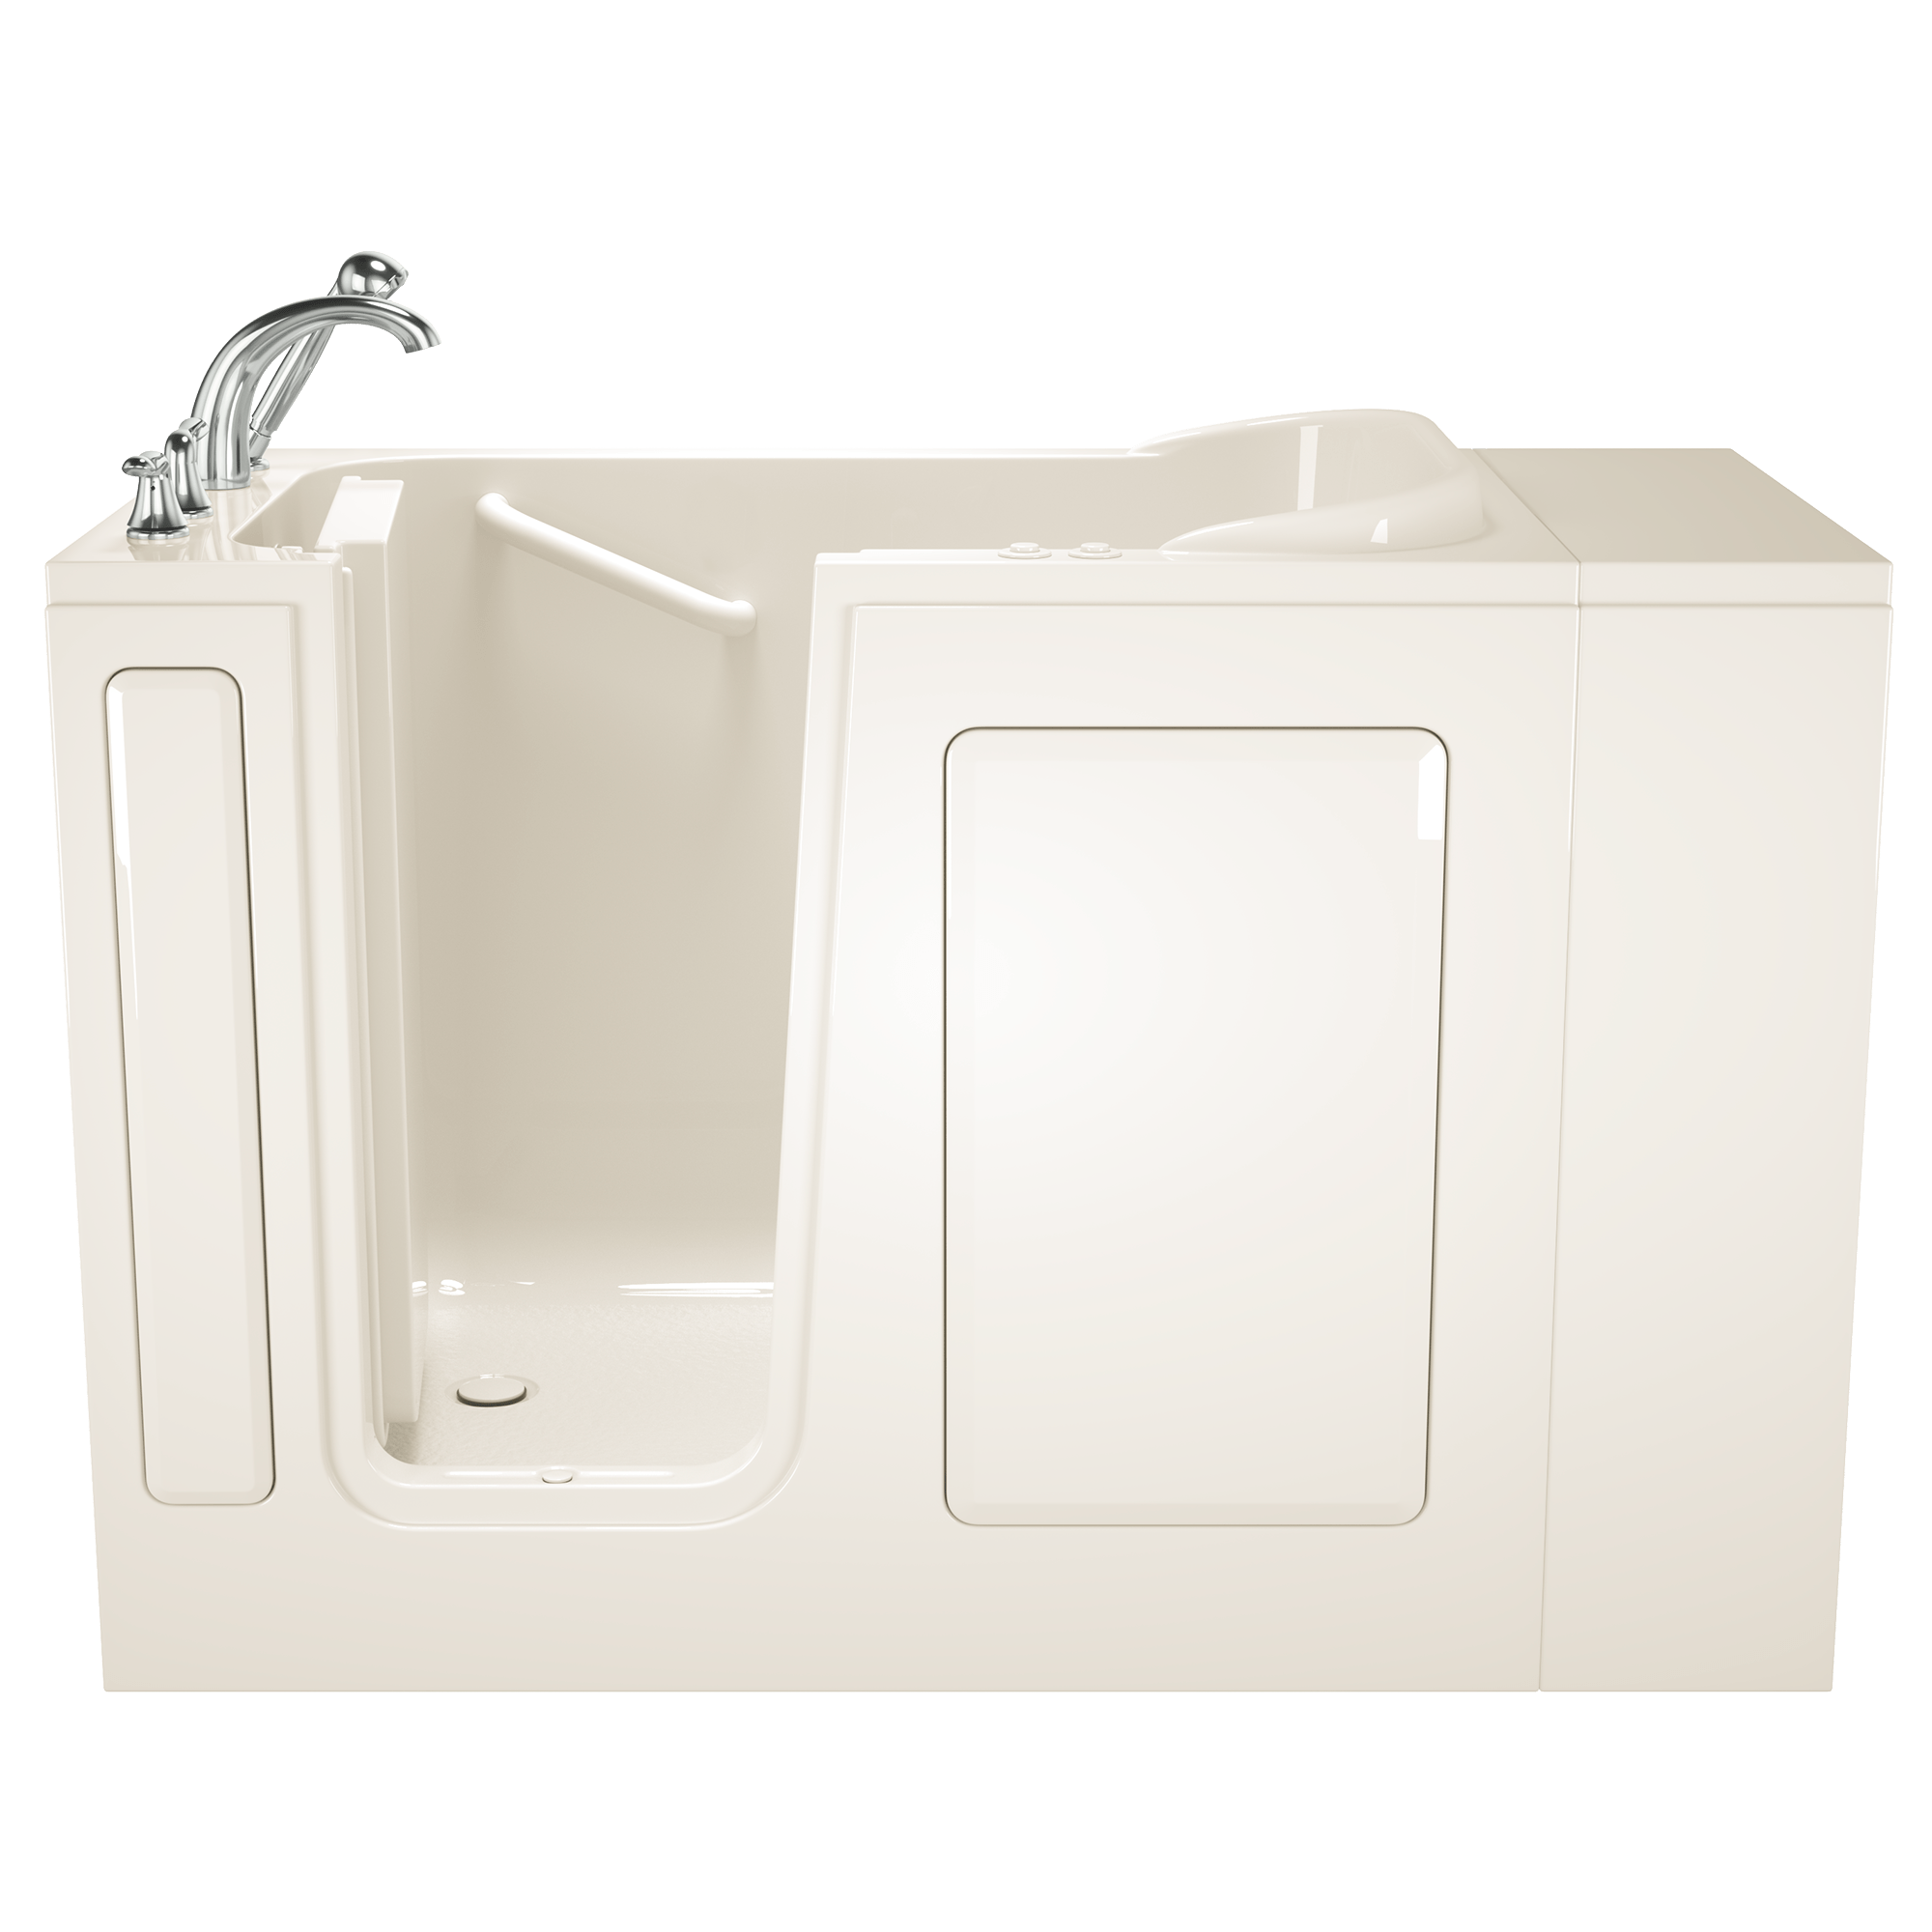 Gelcoat Entry Series 48 x 28-Inch Walk-In Tub With Combination Air Spa and Whirlpool Systems – Left-Hand Drain With Faucet